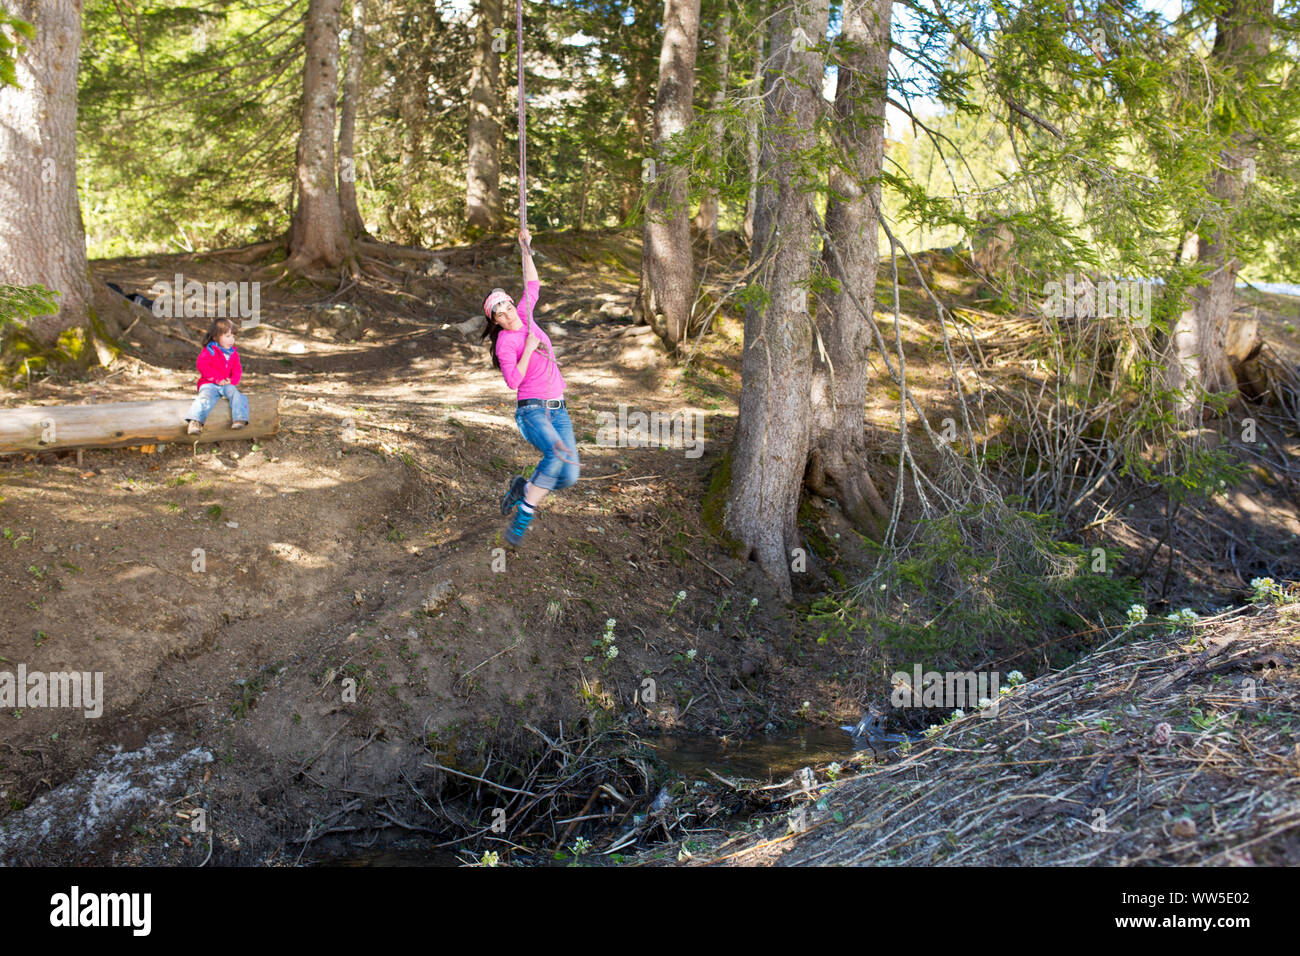 30-40 years old woman hanging on rope in the forest, swinging above a ditch, 5-year-old child in the background Stock Photo